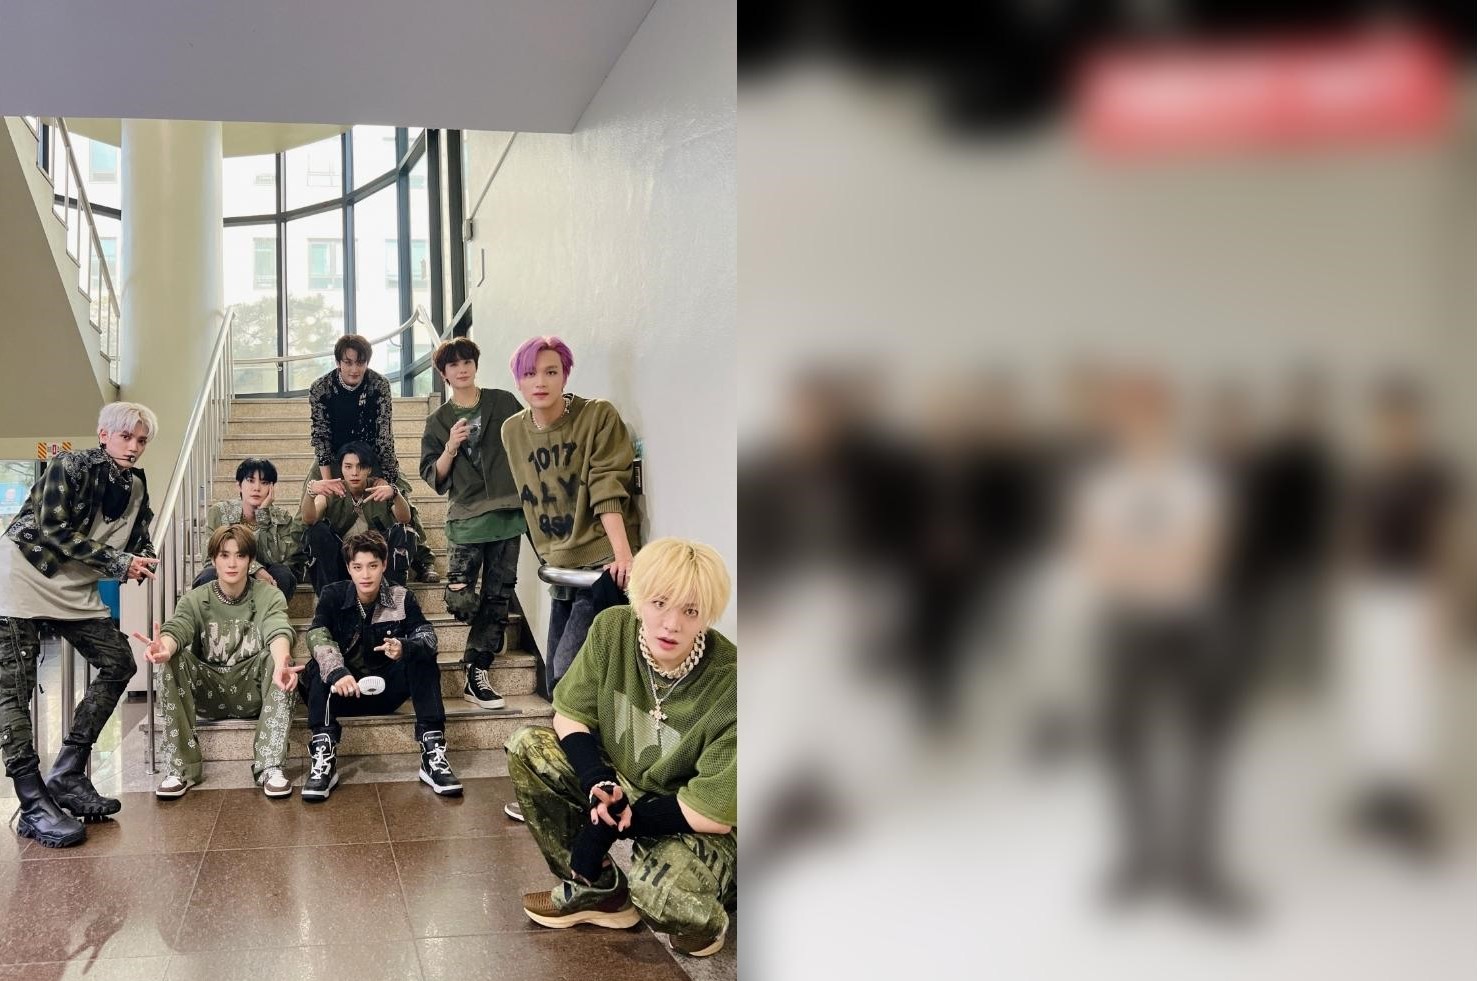 ‘Discriminatory’?  The NCT 127 album cover gets mixed reactions from NCTzens – here’s why